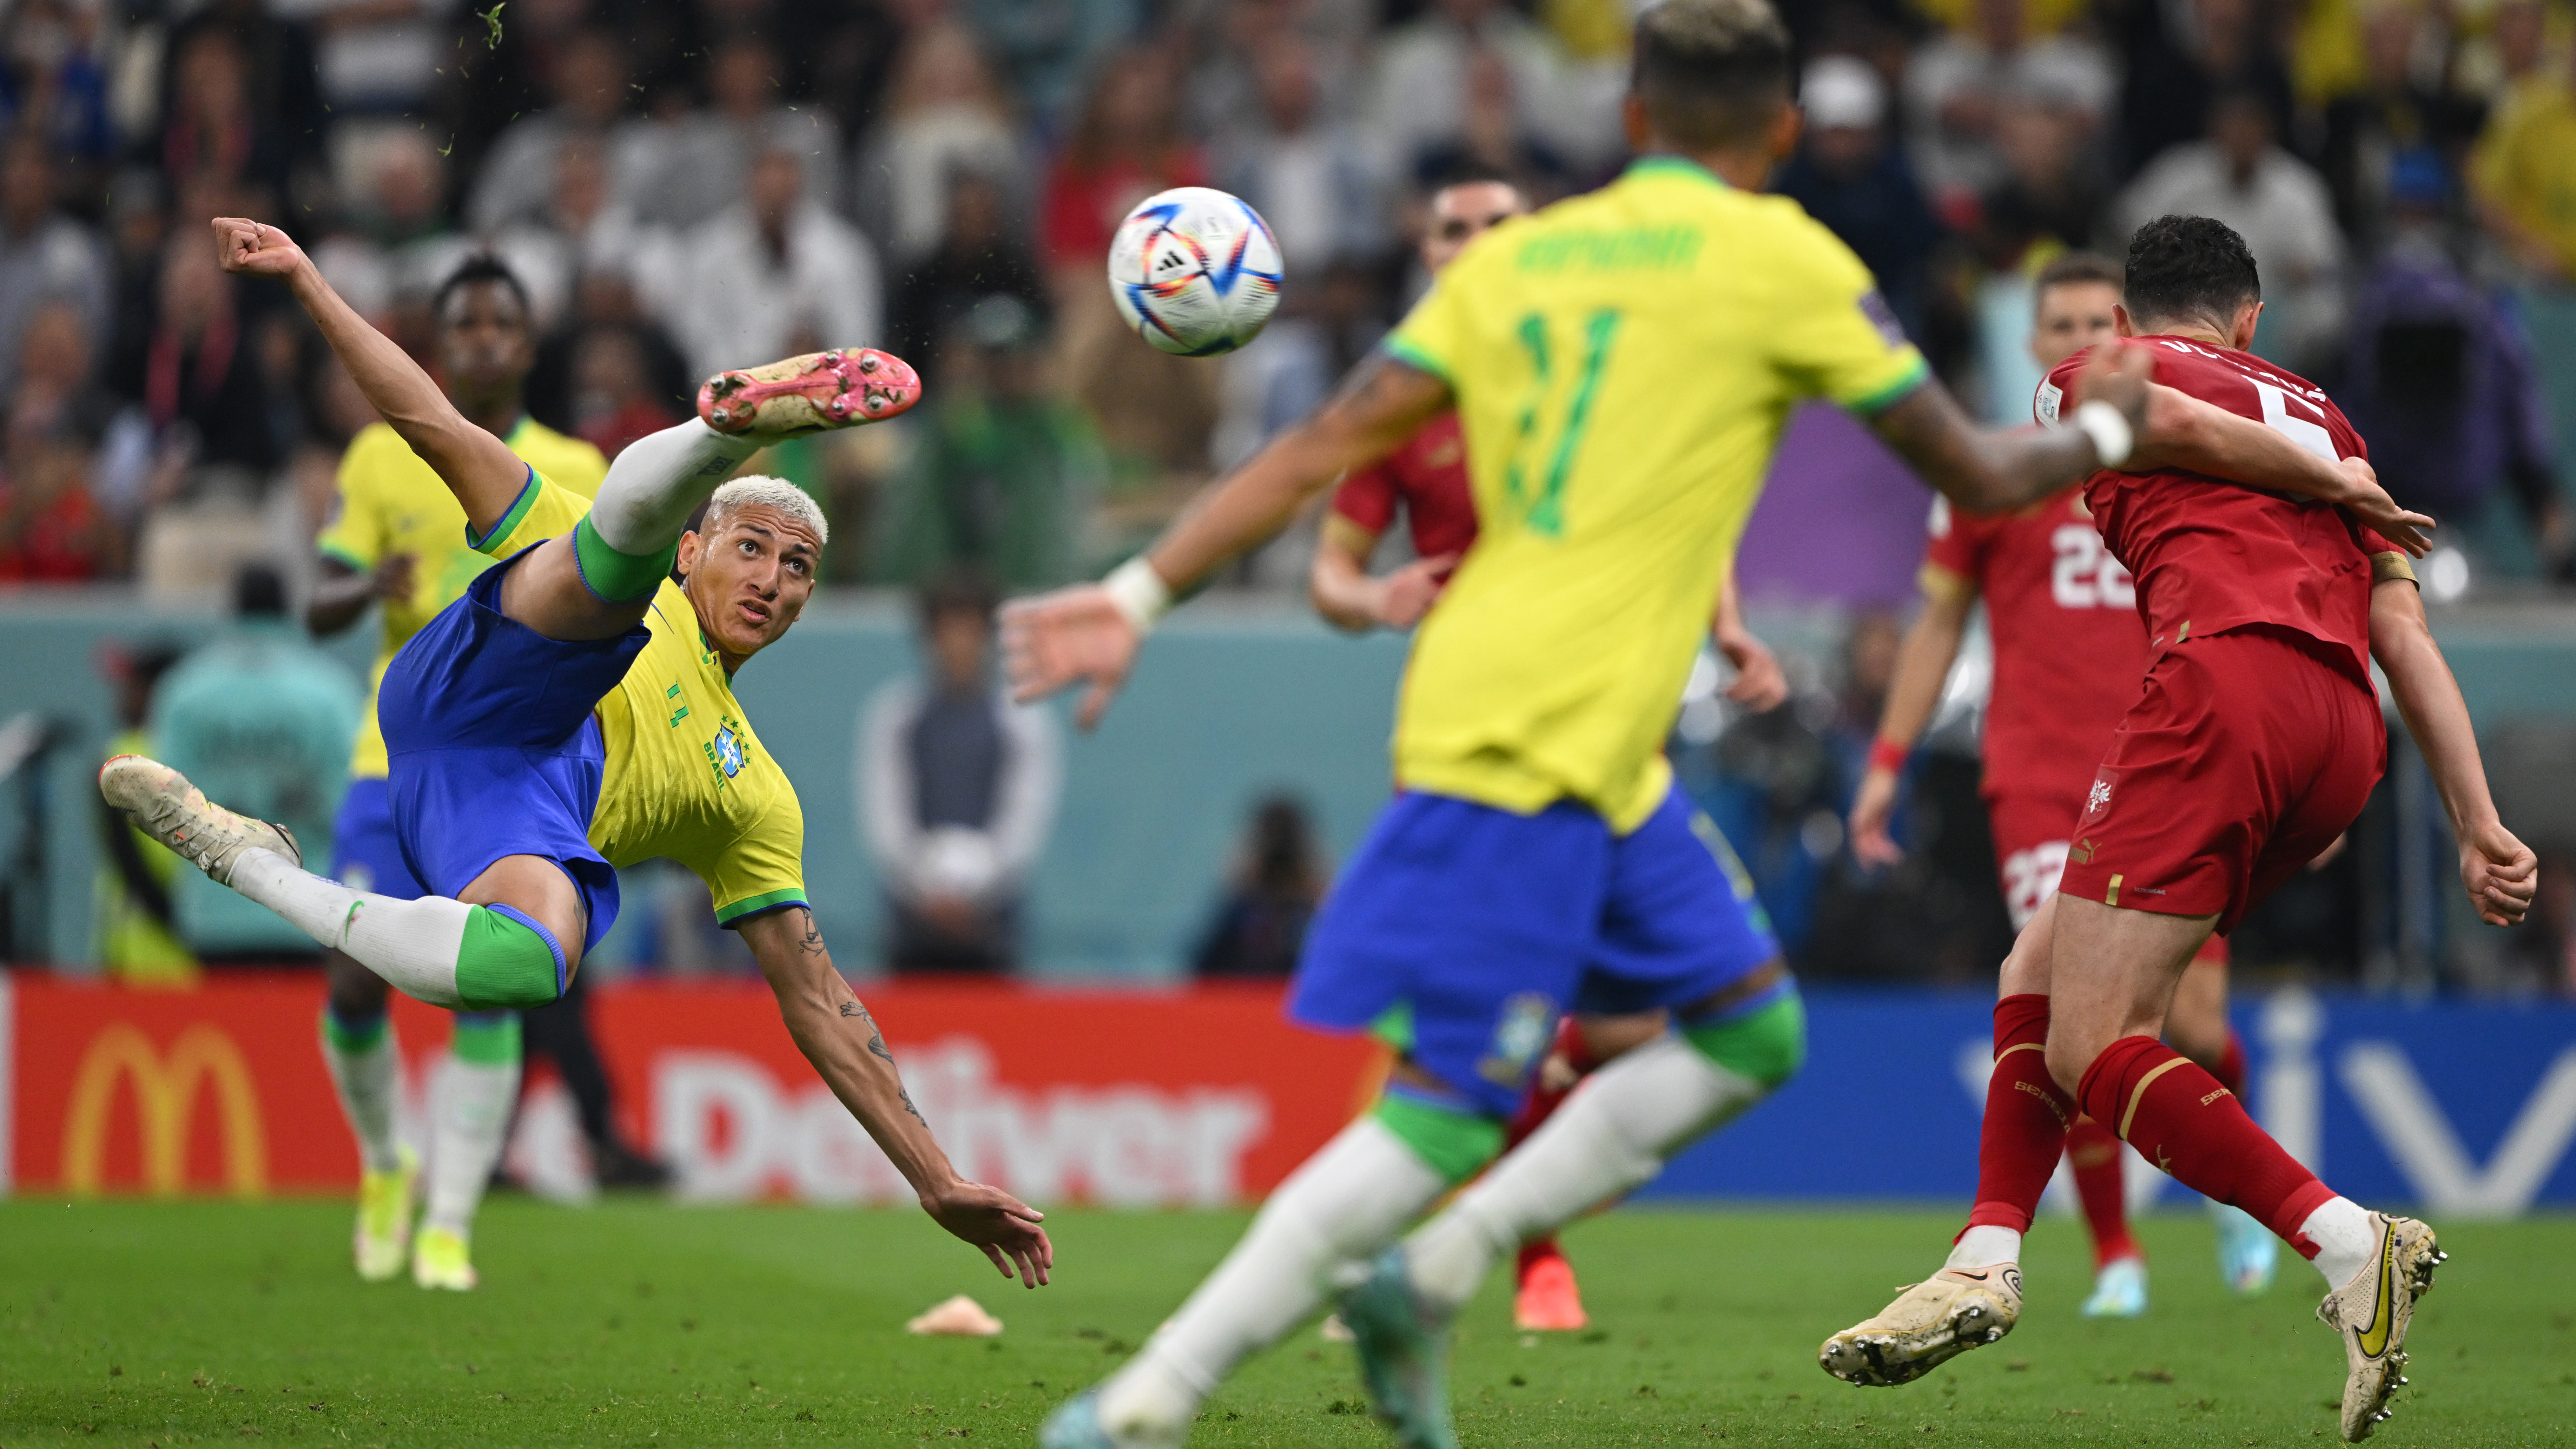 Richarlison of Brazil scores their second goal against Serbia at the World Cup.